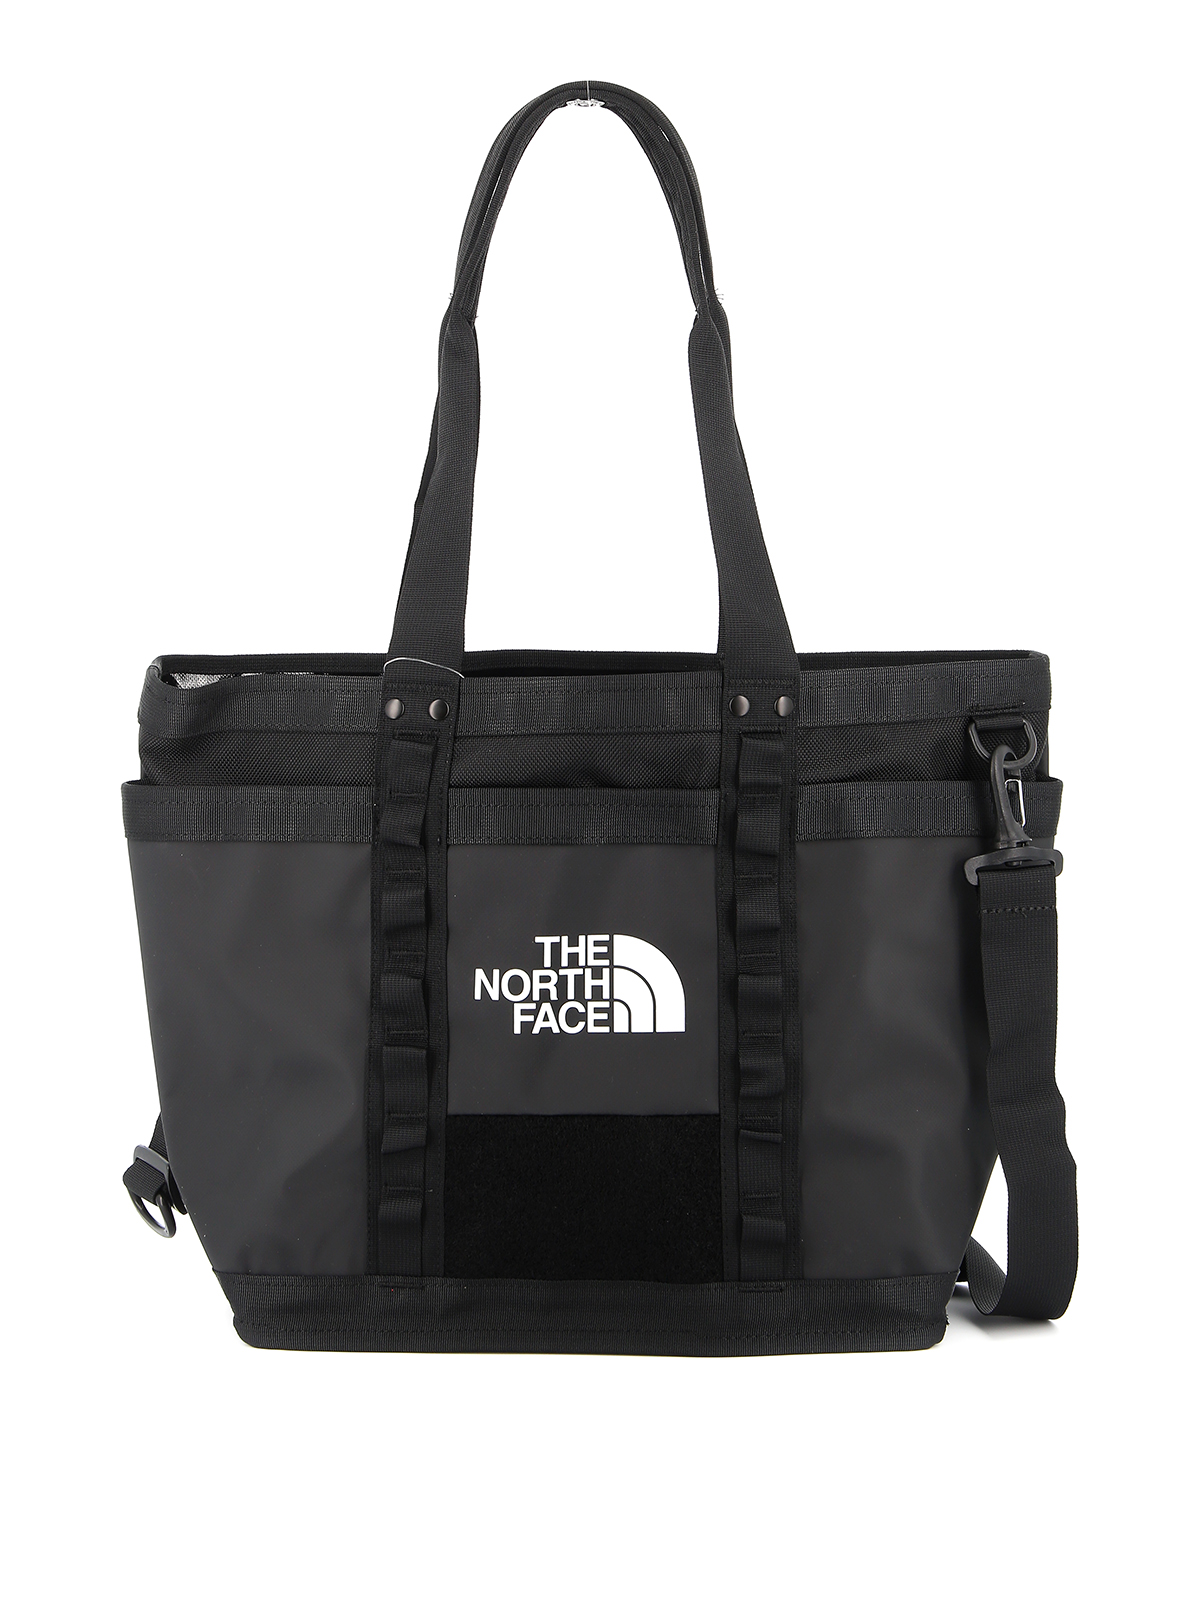 Utility fabric tote - totes bags 